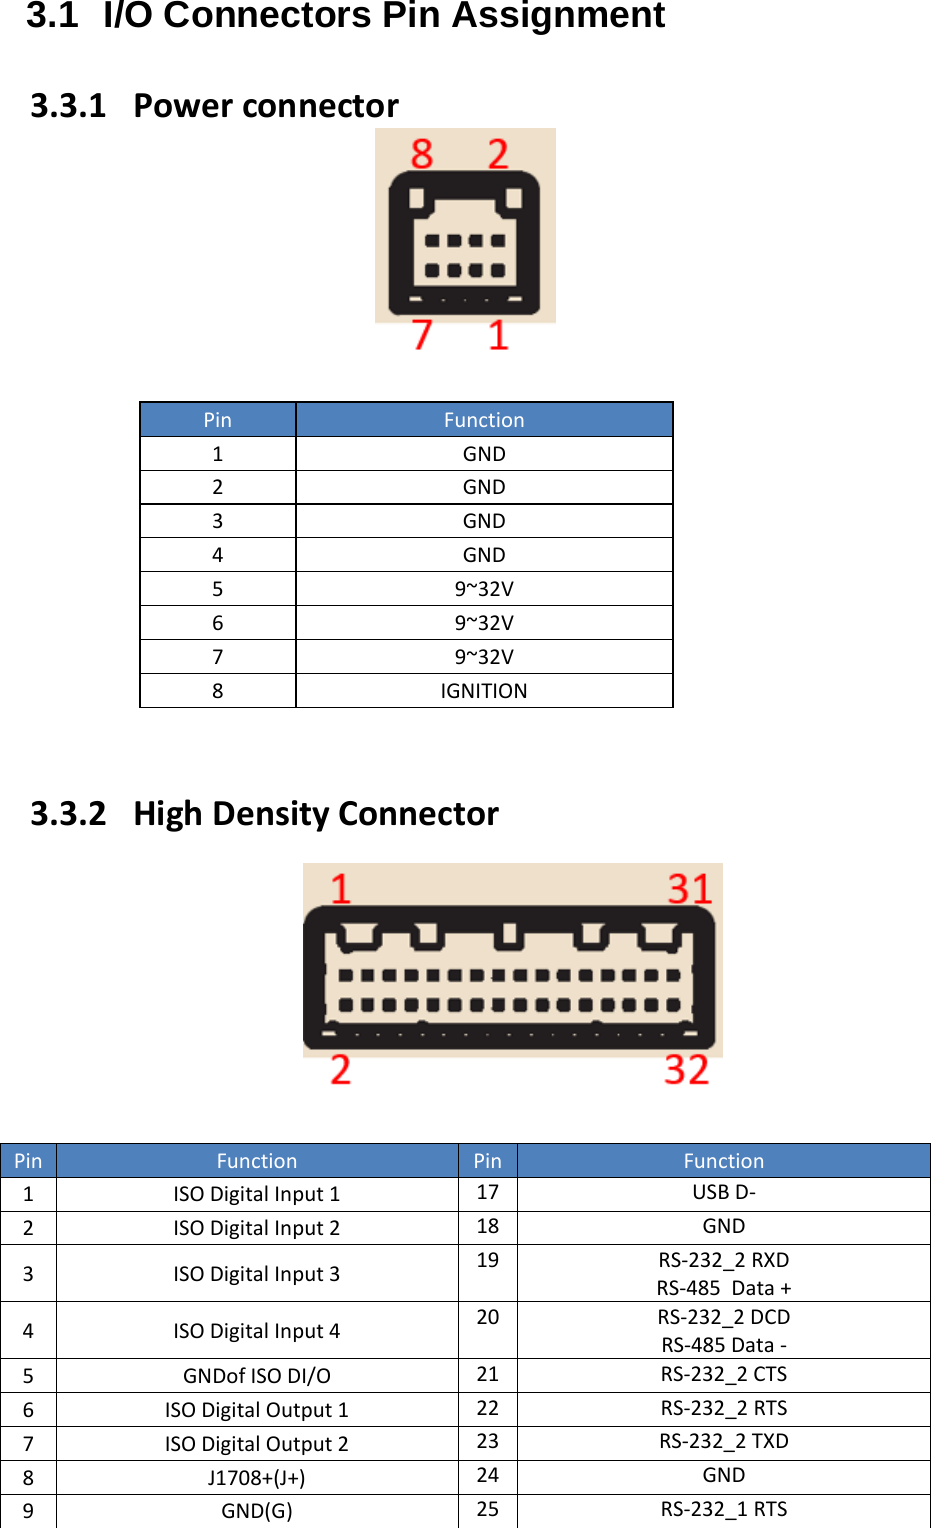    3.1 I/O Connectors Pin Assignment  3.3.1   Power connector   Pin Function 1  GND 2 GND 3 GND 4 GND 5  9~32V 6 9~32V 7 9~32V 8 IGNITION    3.3.2   High Density Connector     Pin Function Pin Function 1 ISO Digital Input 1 17 USB D- 2 ISO Digital Input 2 18 GND 3  ISO Digital Input 3 19 RS-232_2 RXD RS-485  Data + 4  ISO Digital Input 4 20 RS-232_2 DCD RS-485 Data - 5 GNDof ISO DI/O 21 RS-232_2 CTS 6  ISO Digital Output 1 22 RS-232_2 RTS 7 ISO Digital Output 2 23 RS-232_2 TXD 8 J1708+(J+) 24 GND 9 GND(G) 25 RS-232_1 RTS 